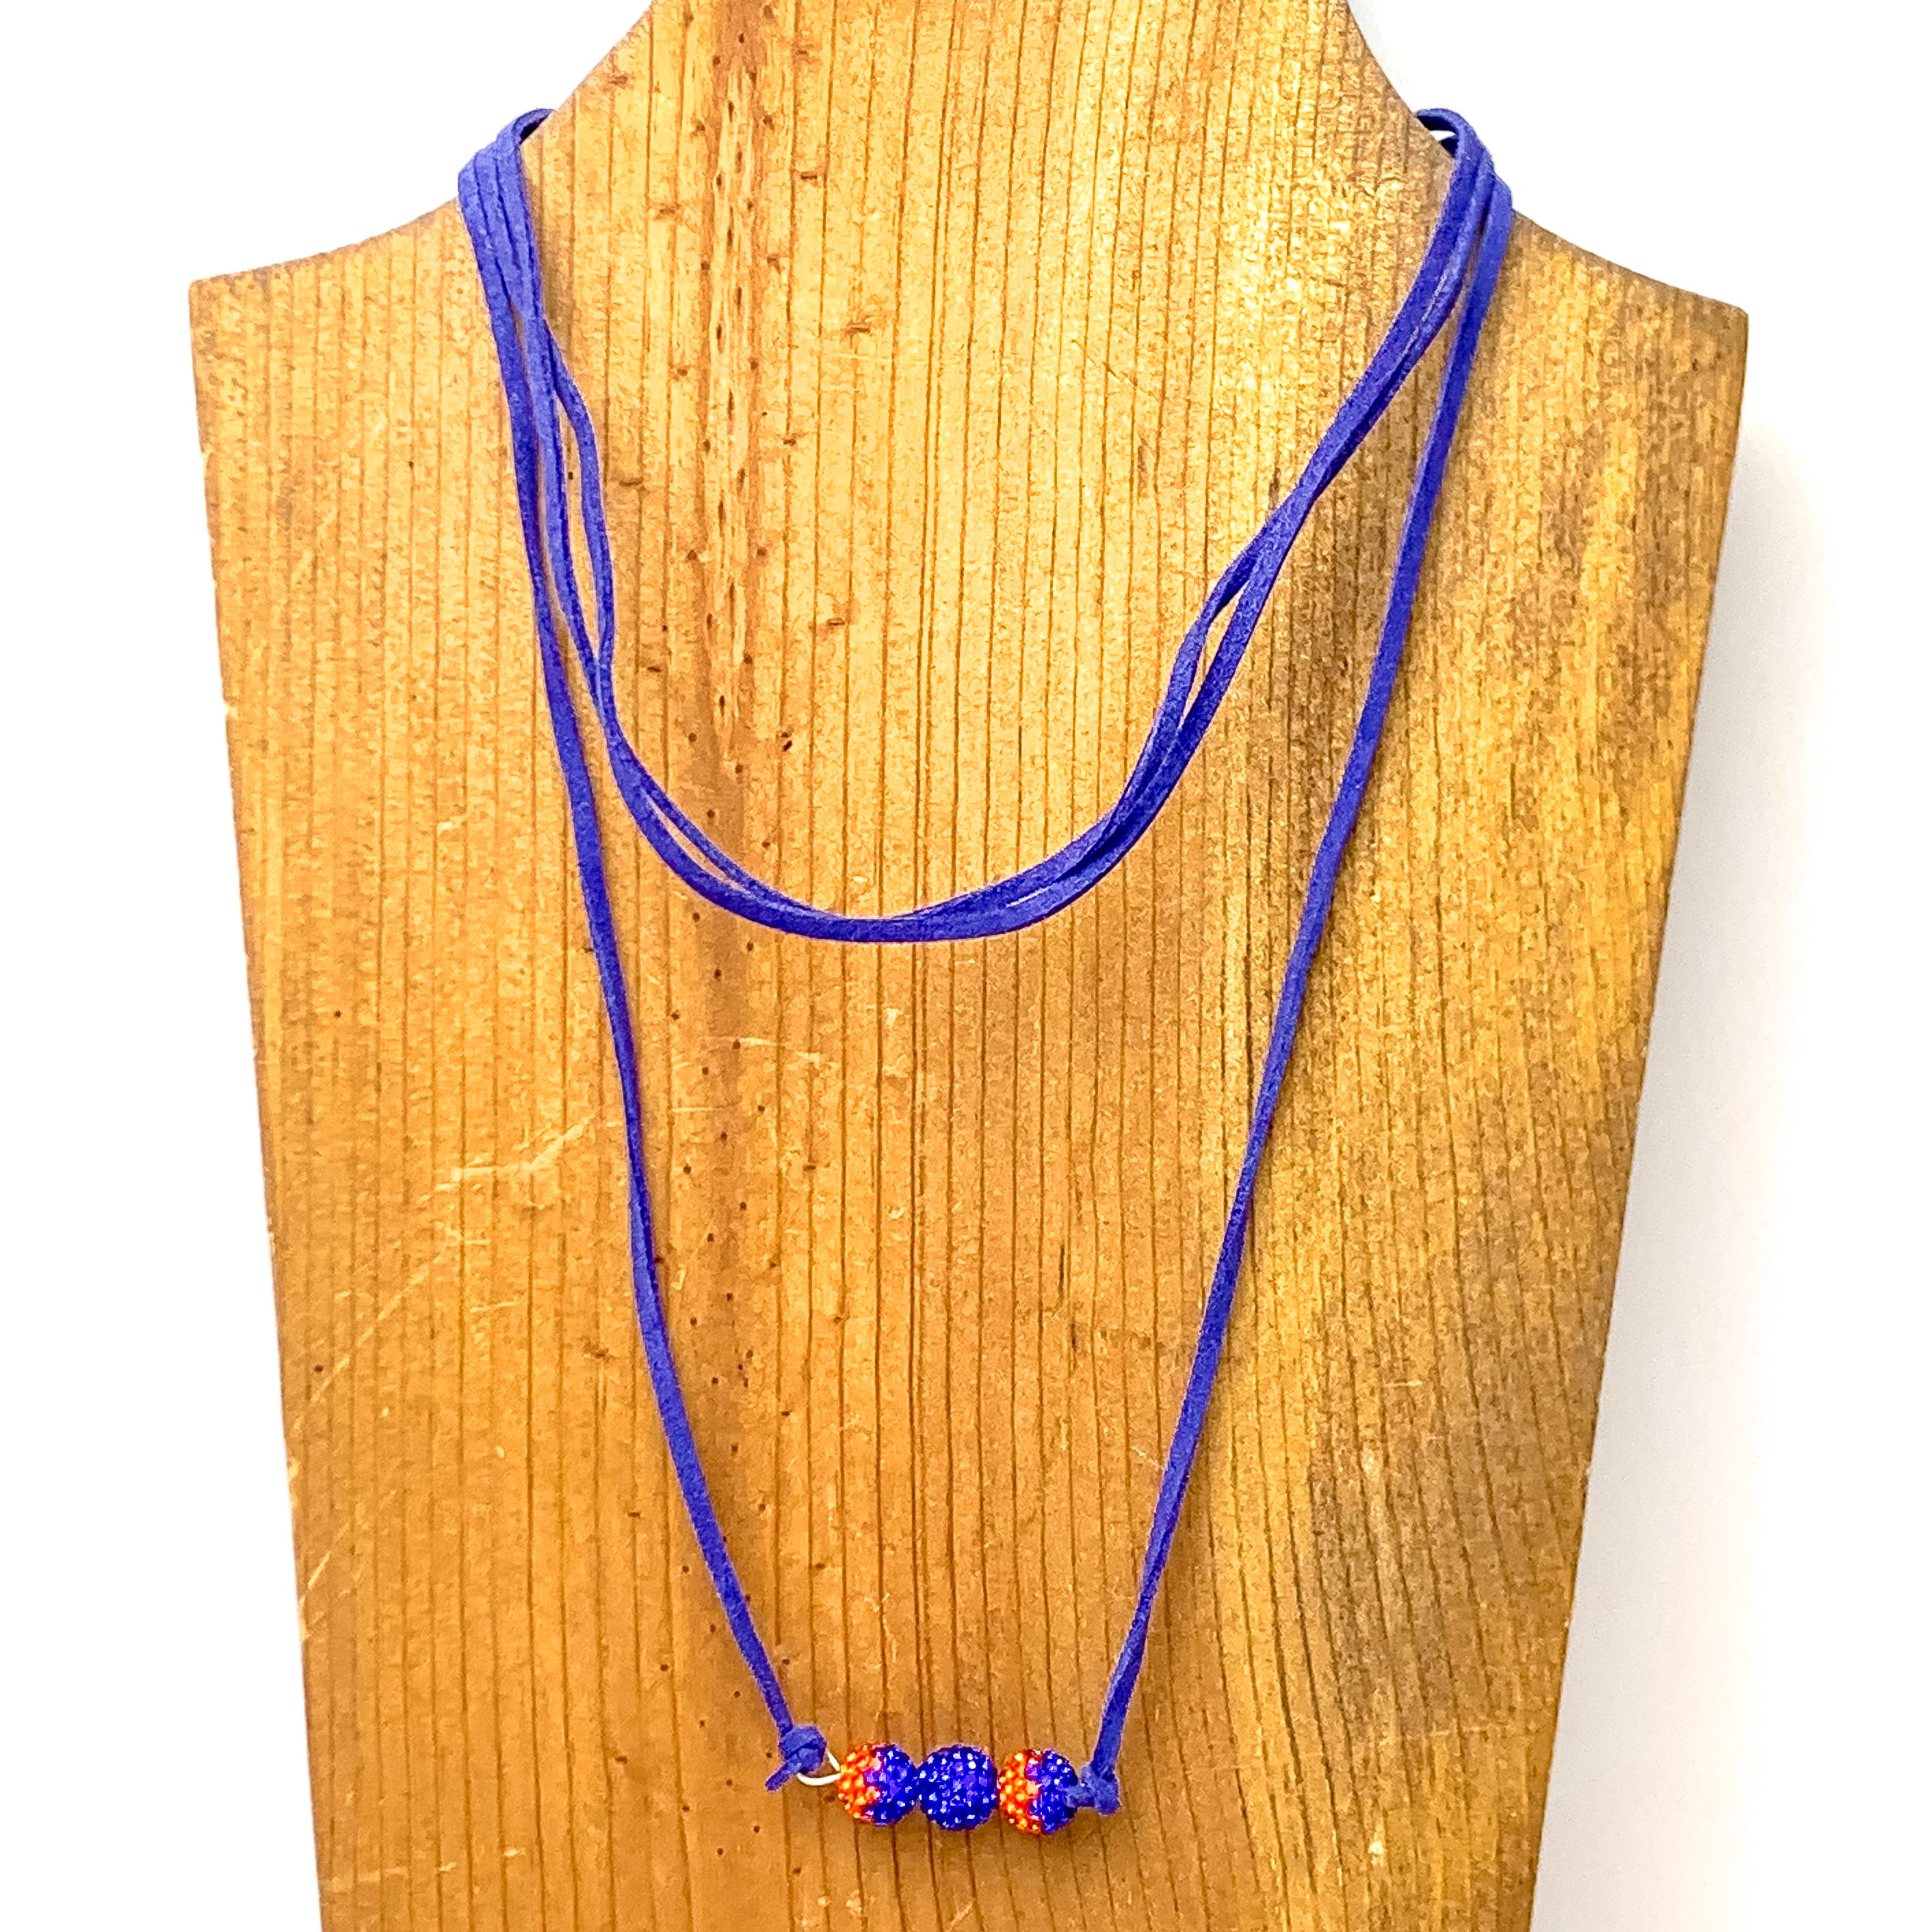 Blue Suede Cord Necklace with Orange and Blue Rhinestone Beads - Giddy Up Glamour Boutique